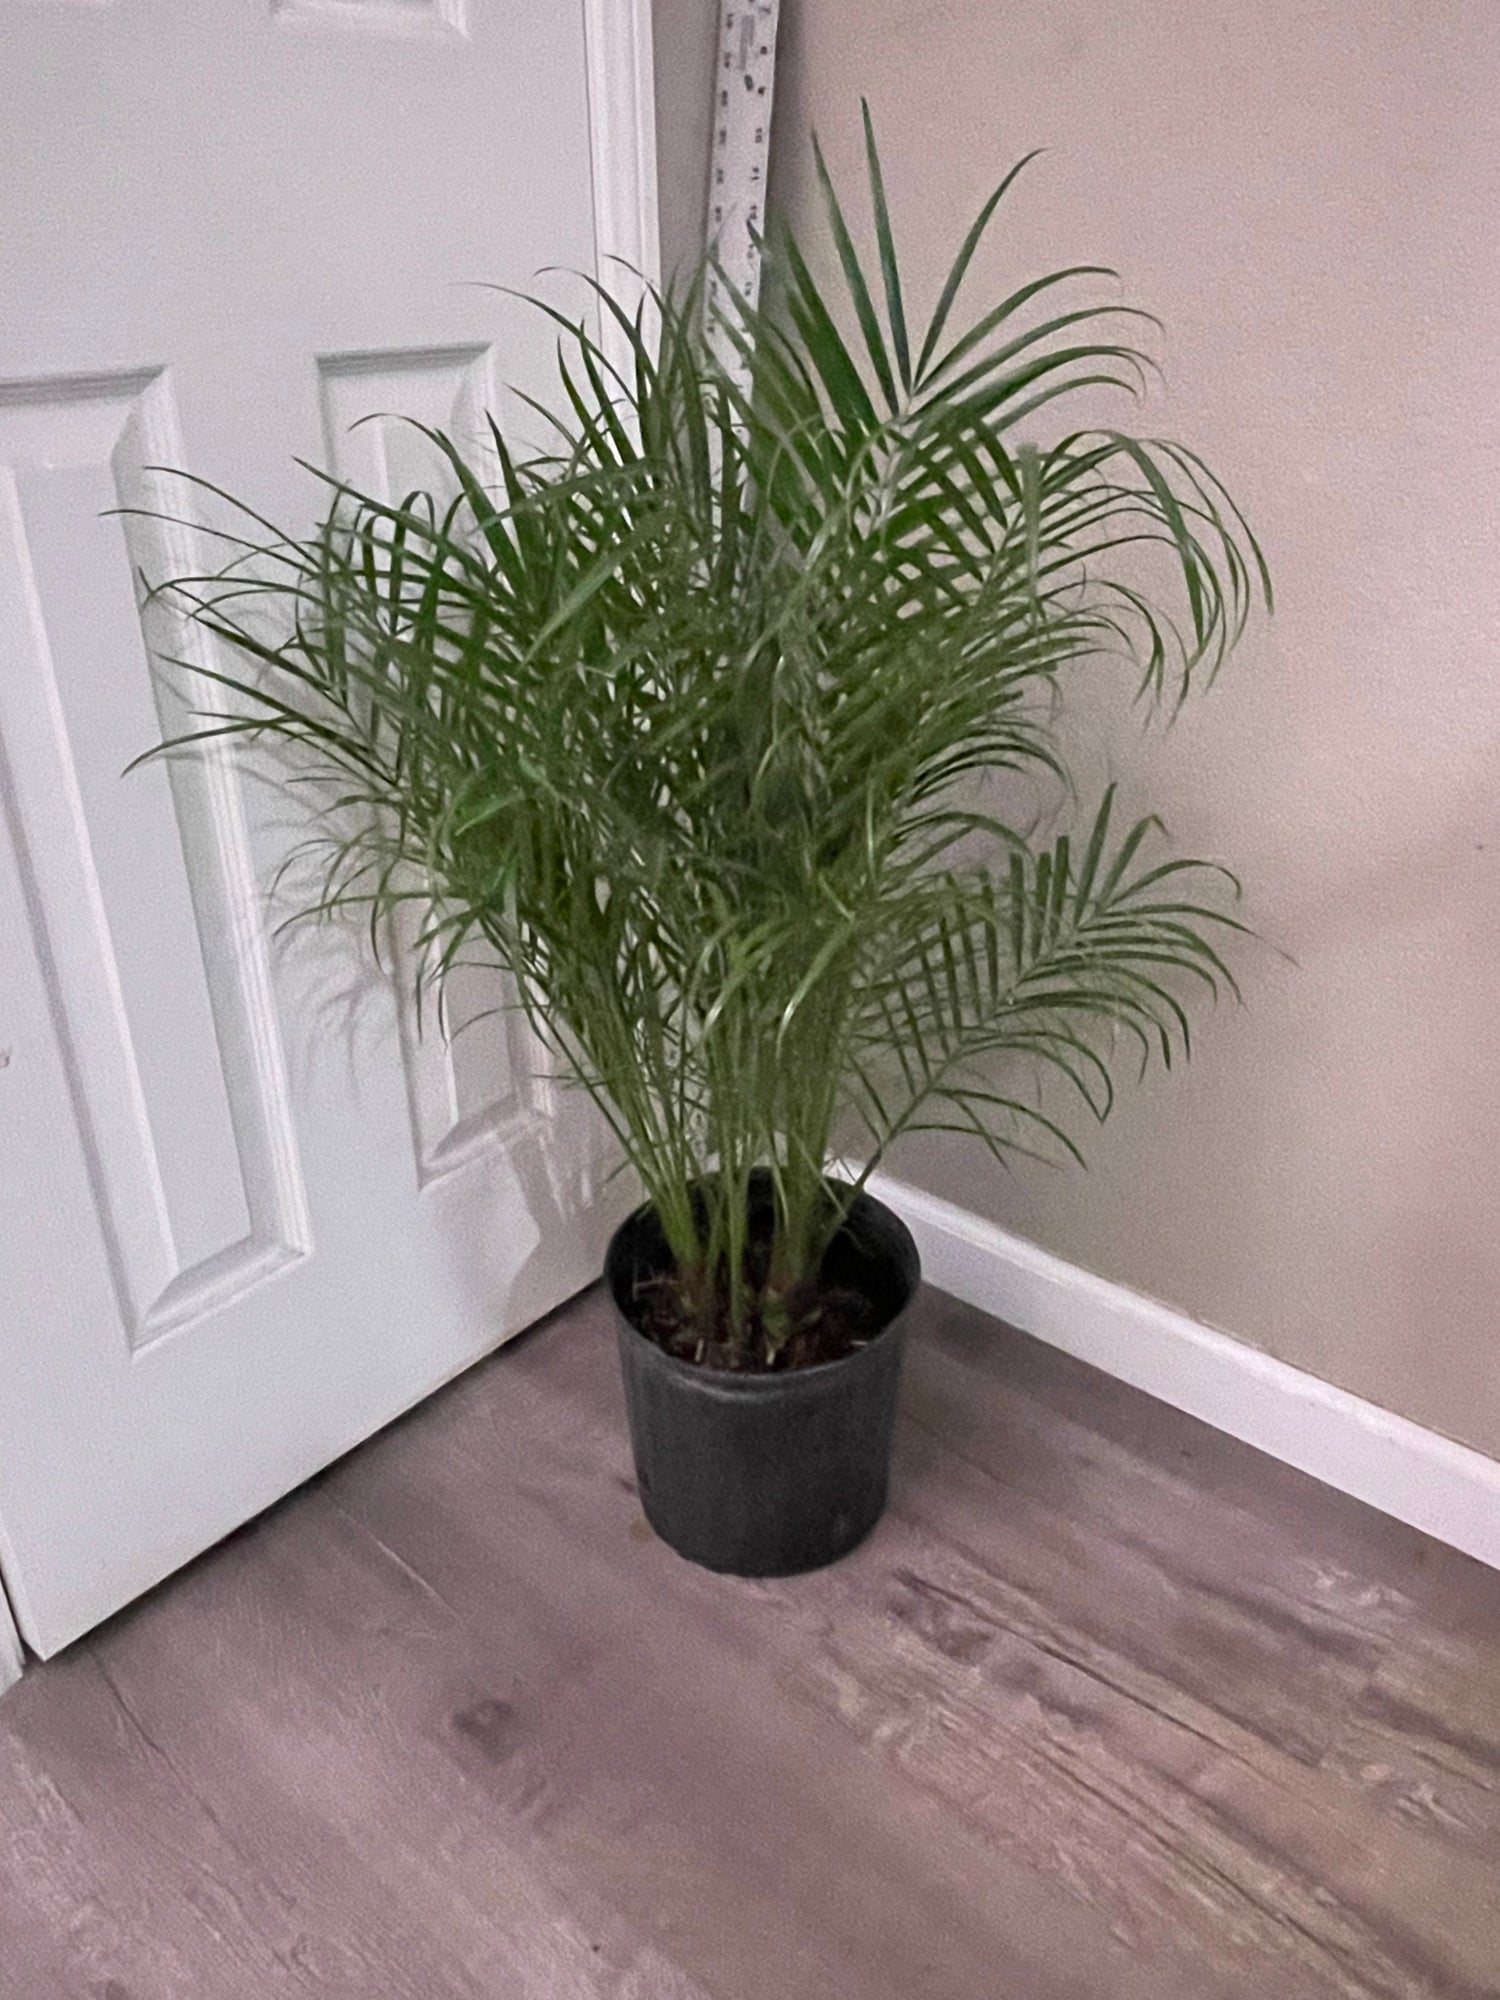 2-3 ft Tall -3 gallon multi trunk  -Roebellini-Pygmy Dare Palm -indoor or outdoor -low maintenance easy care